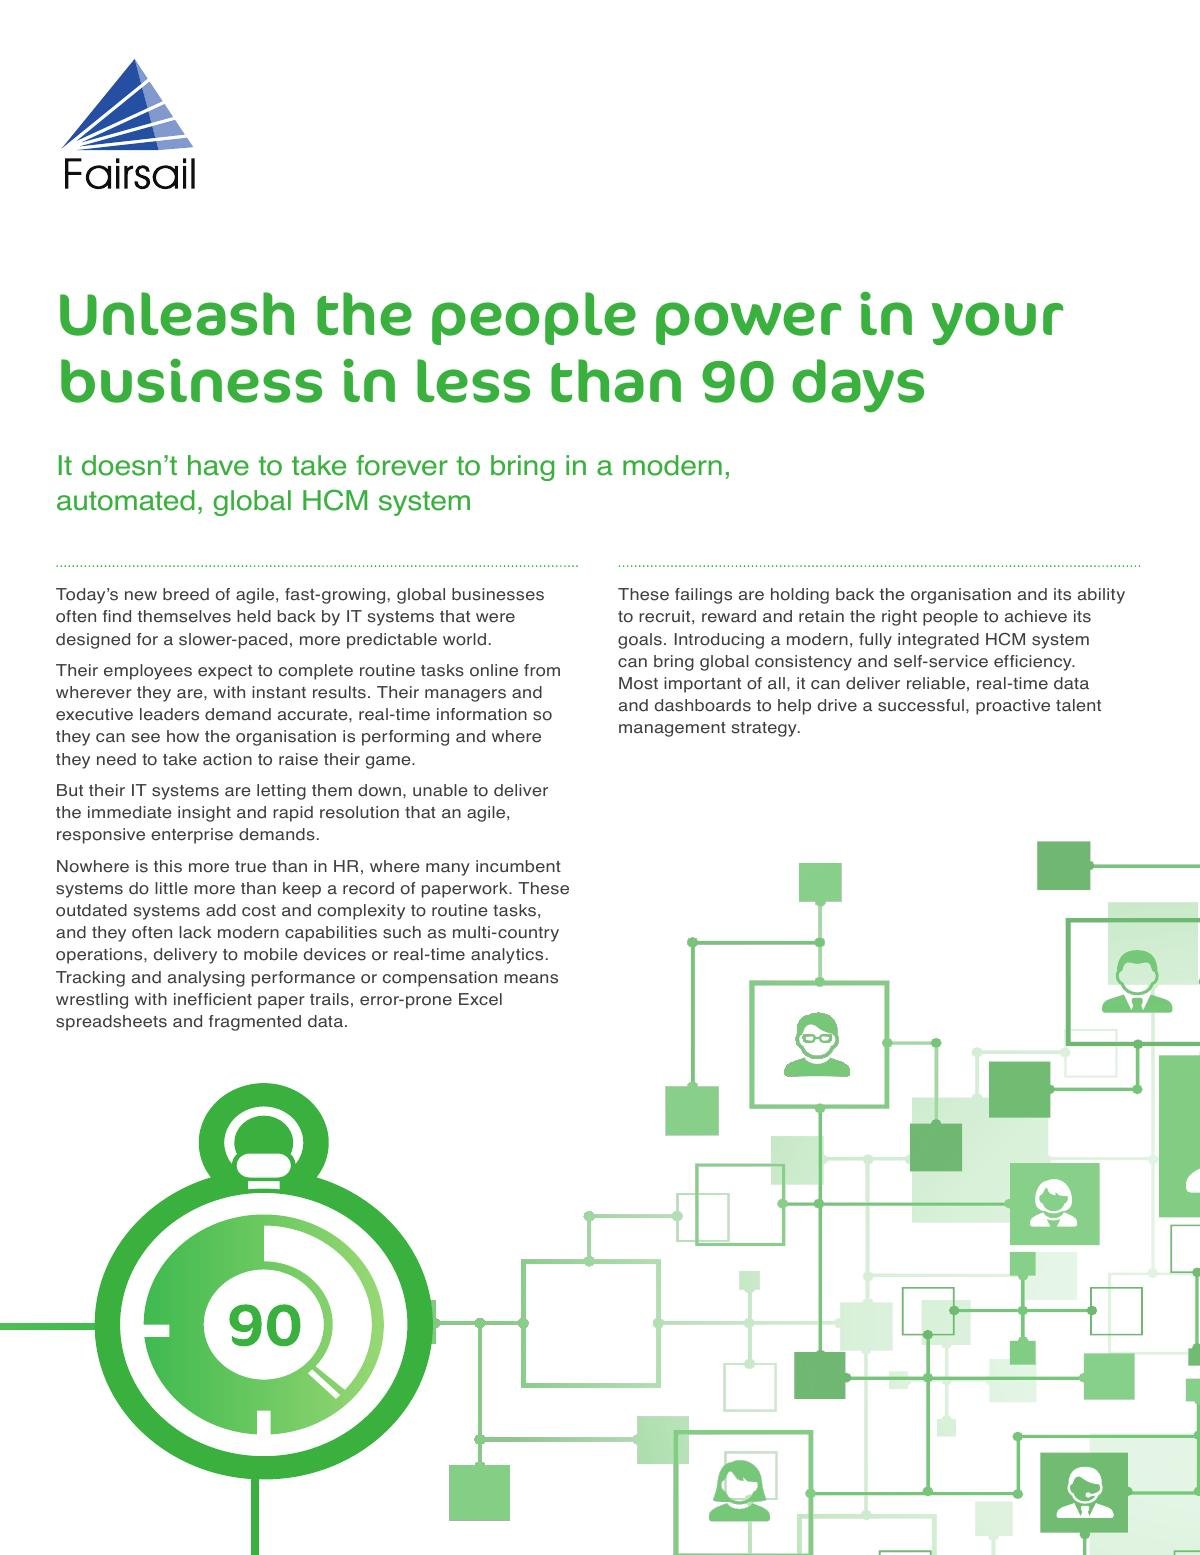 Unleash the people power of your business in less than 90 days 